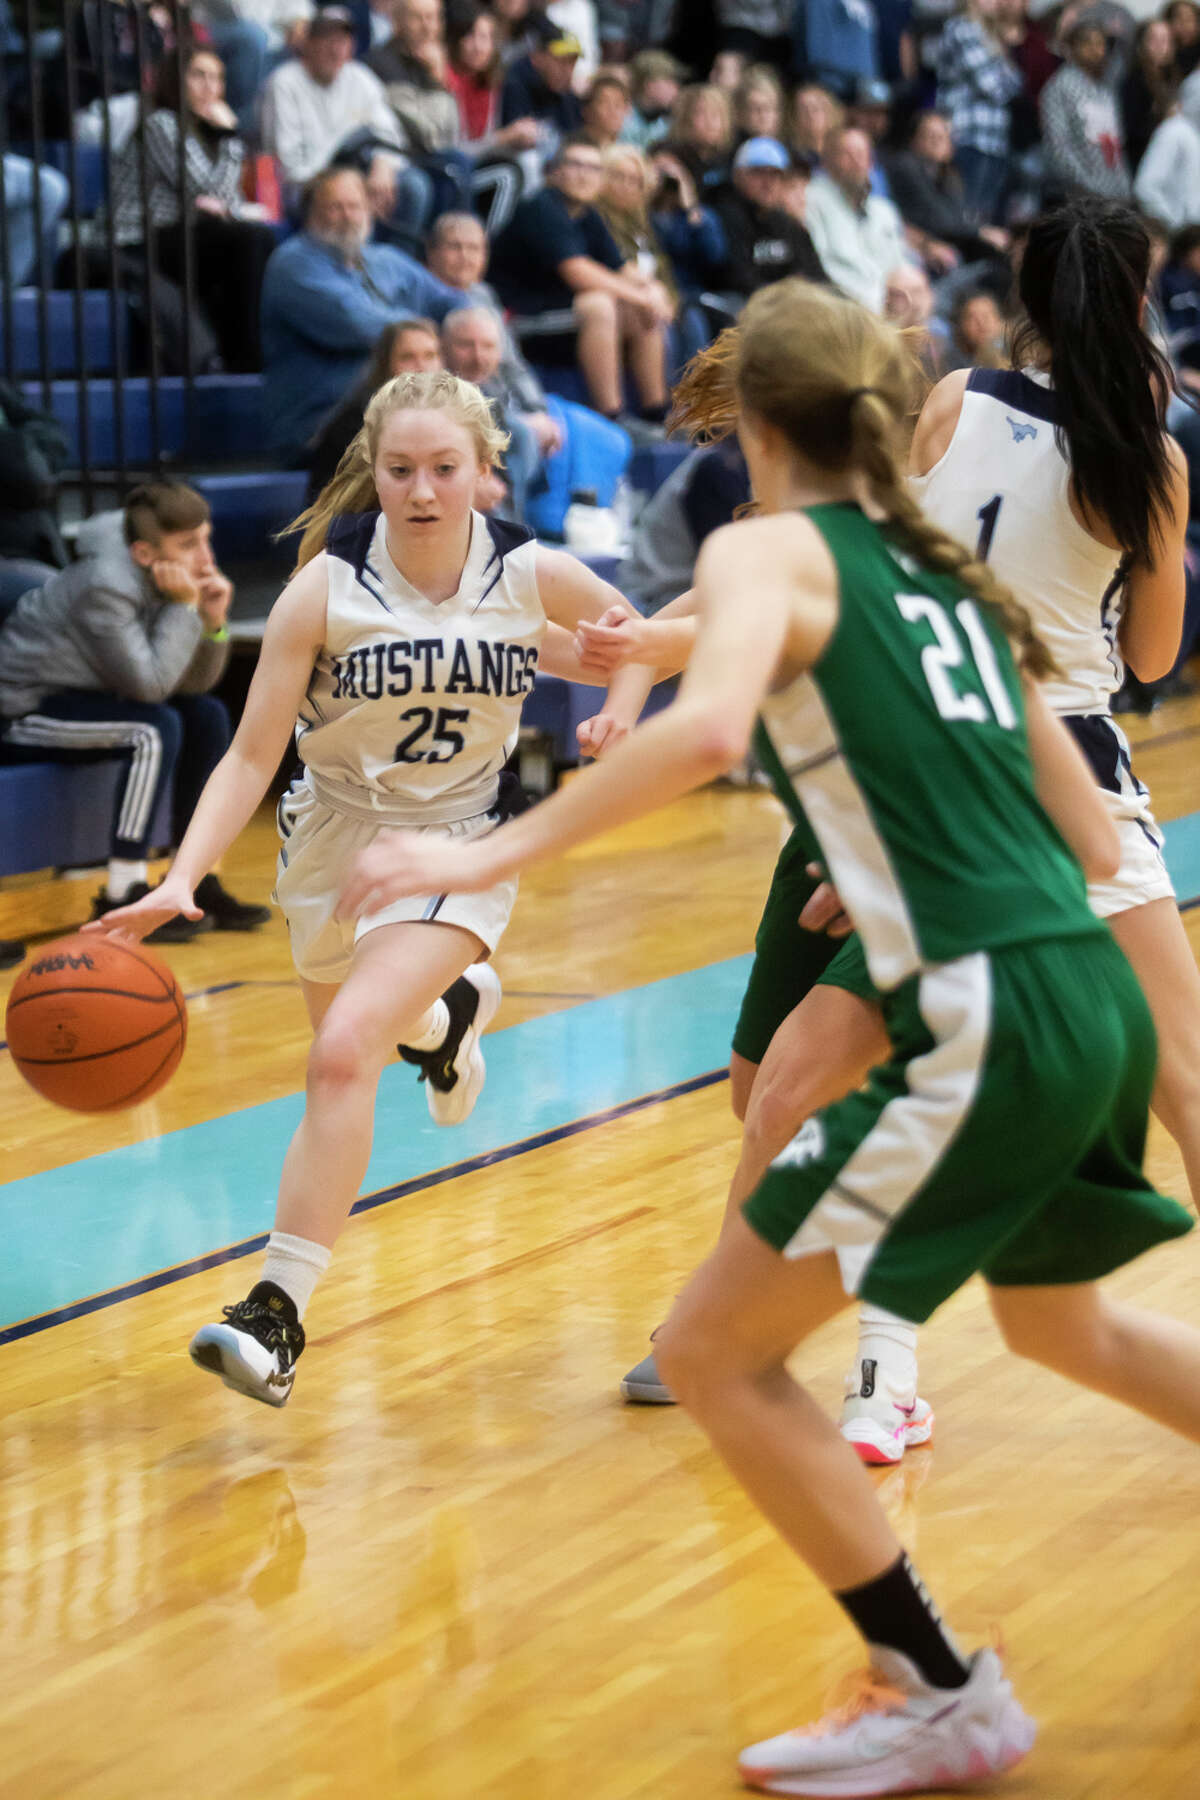 Meridian's Grace Chinavare dribbles down the court during the Mustangs' game against Freeland Tuesday, Nov. 30, 2021 at Meridian Early College High School.